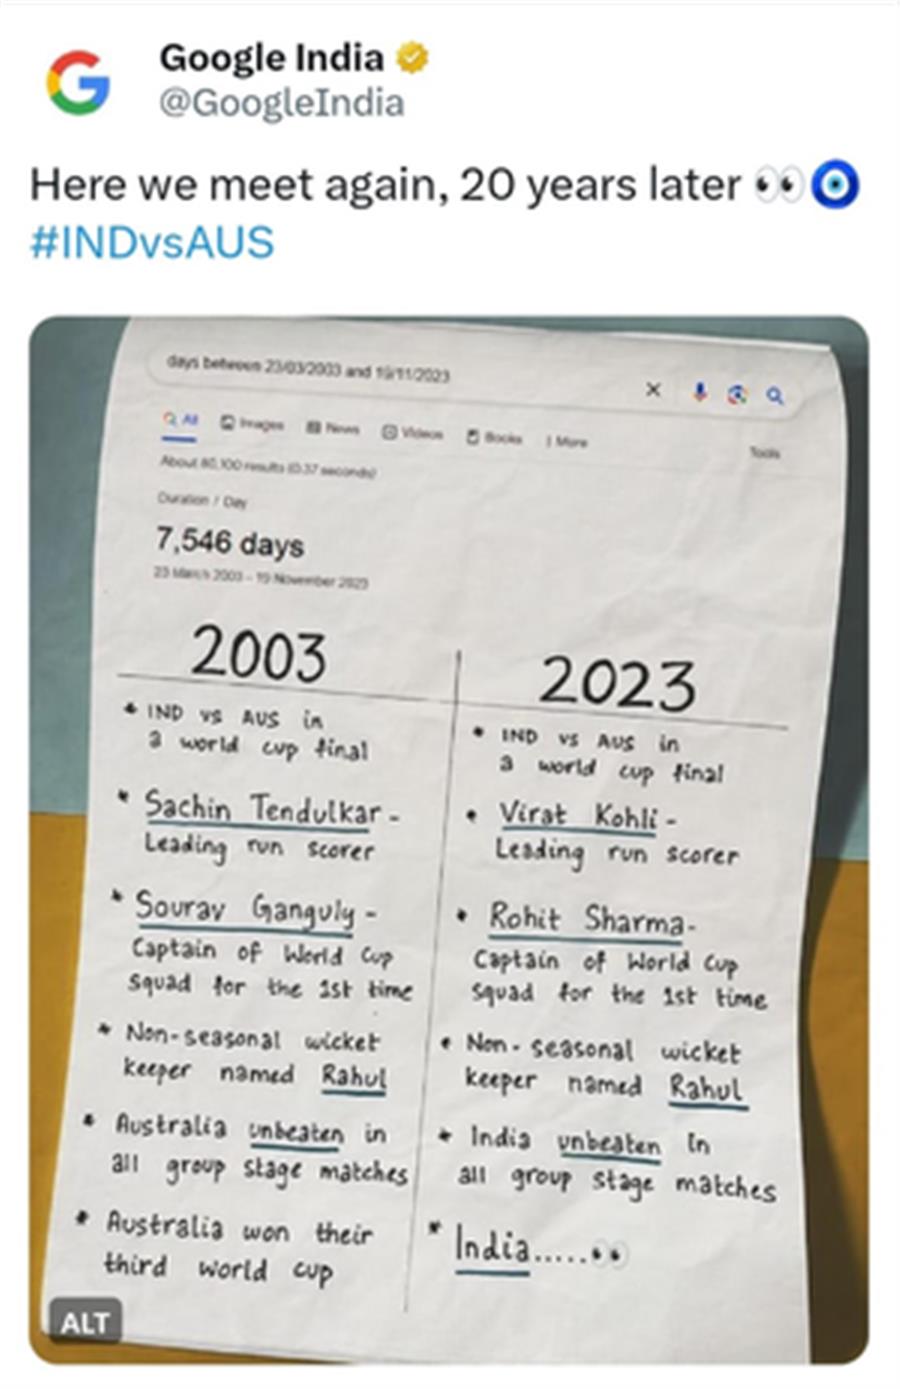 Google India shares similarities between 2003 and 2023 World Cup finals